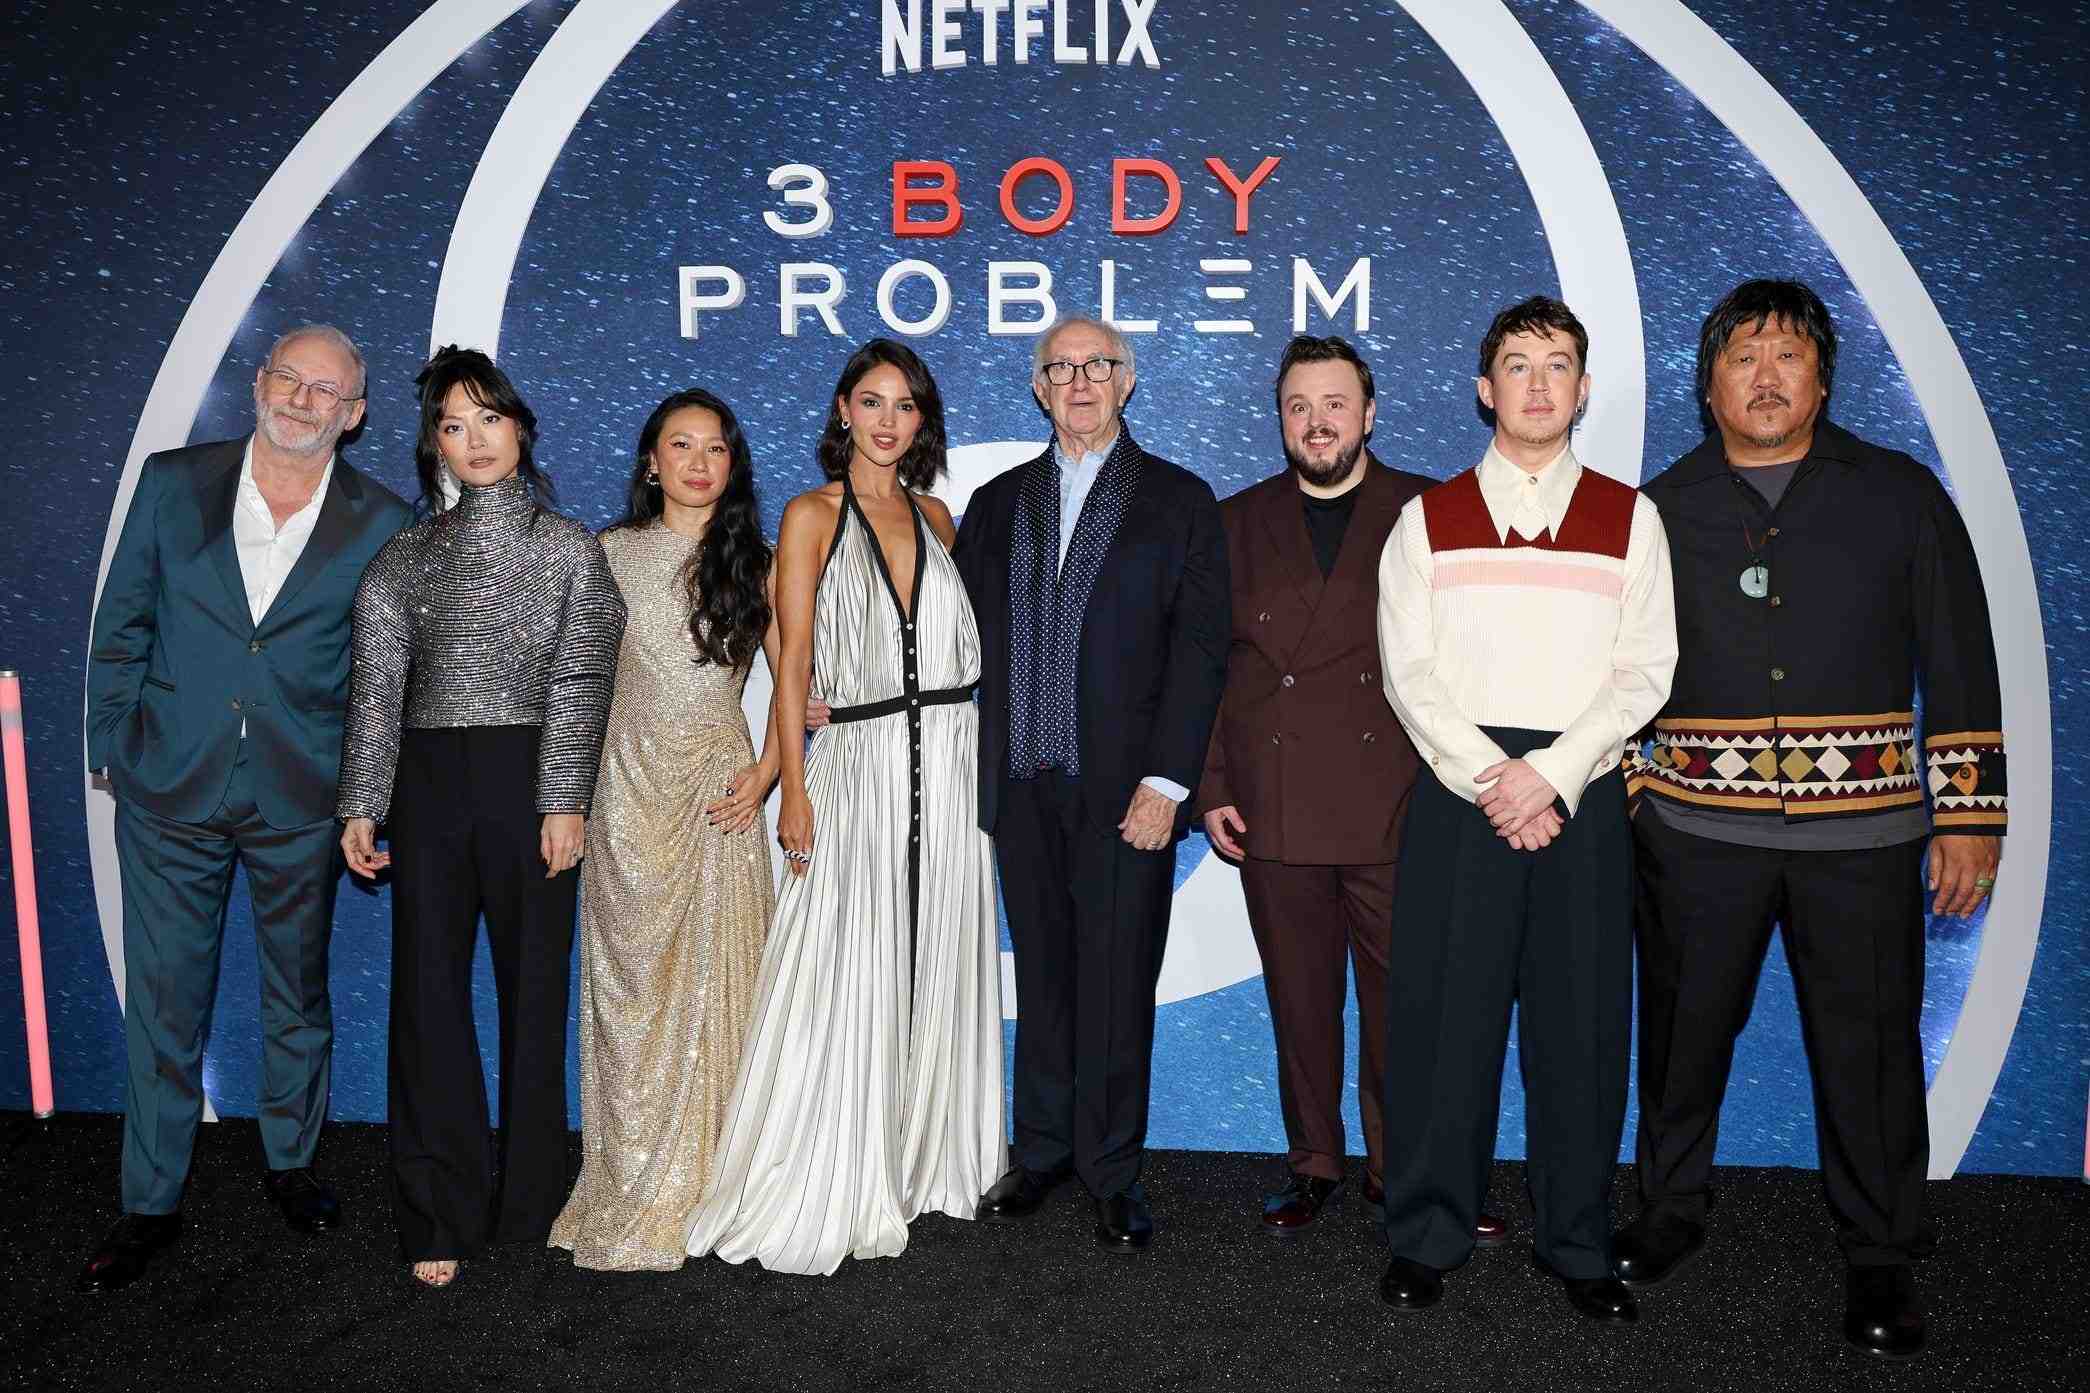 Could "3 Body Problem" topple "Game of Thrones" from its regal perch? Dive into cosmic intrigue, intellectual depth and quantum quandary that's capturing fans’ hearts in droves.